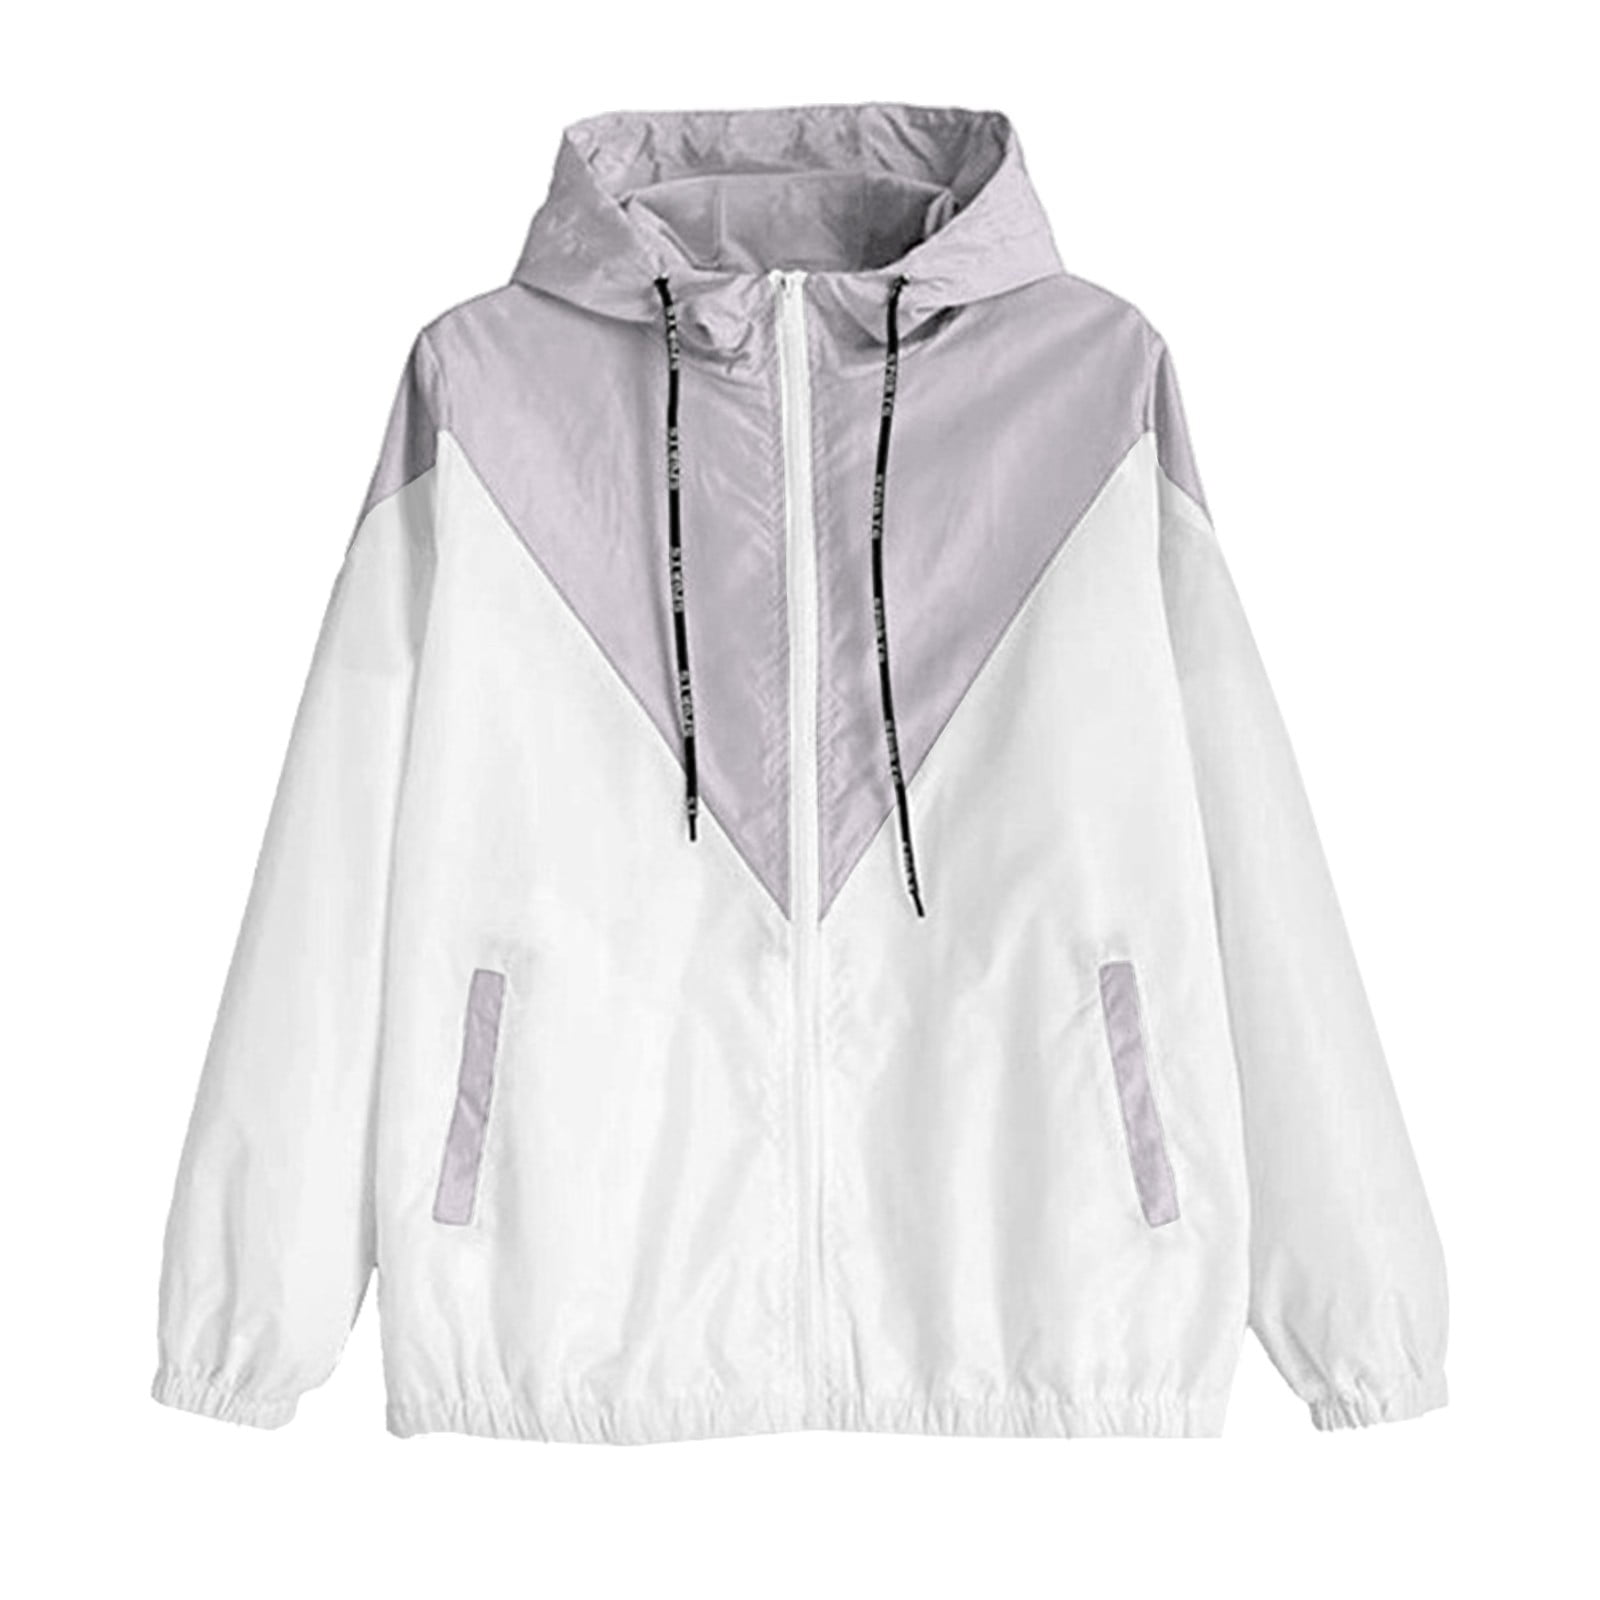 HTNBO Lightweight Jackets for Women Hooded Plus Size with Pockets ...